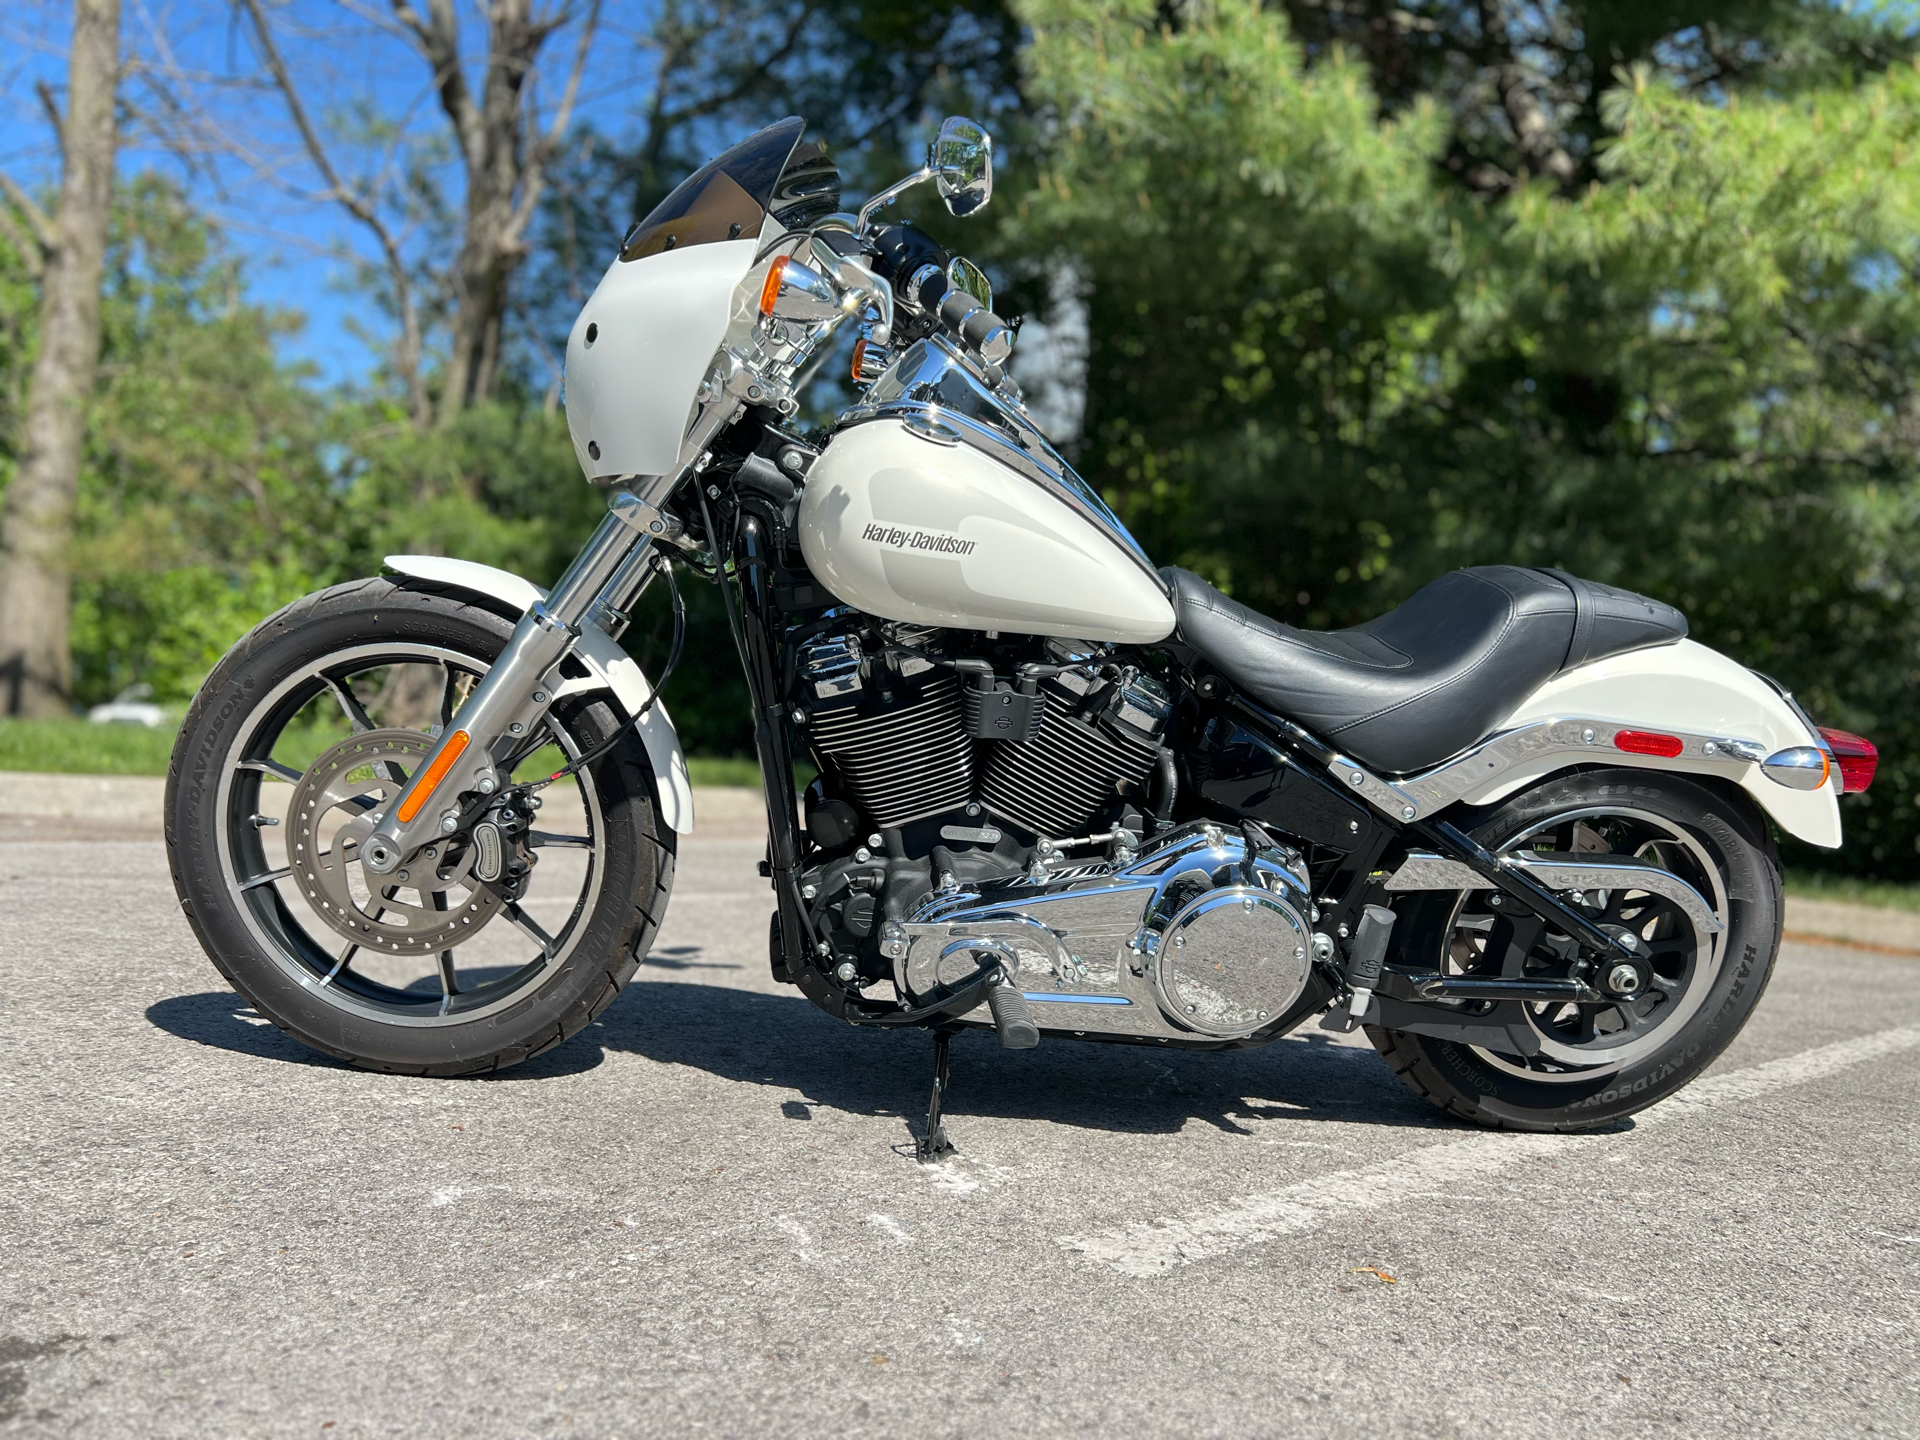 2018 Harley-Davidson Low Rider® 107 in Franklin, Tennessee - Photo 17